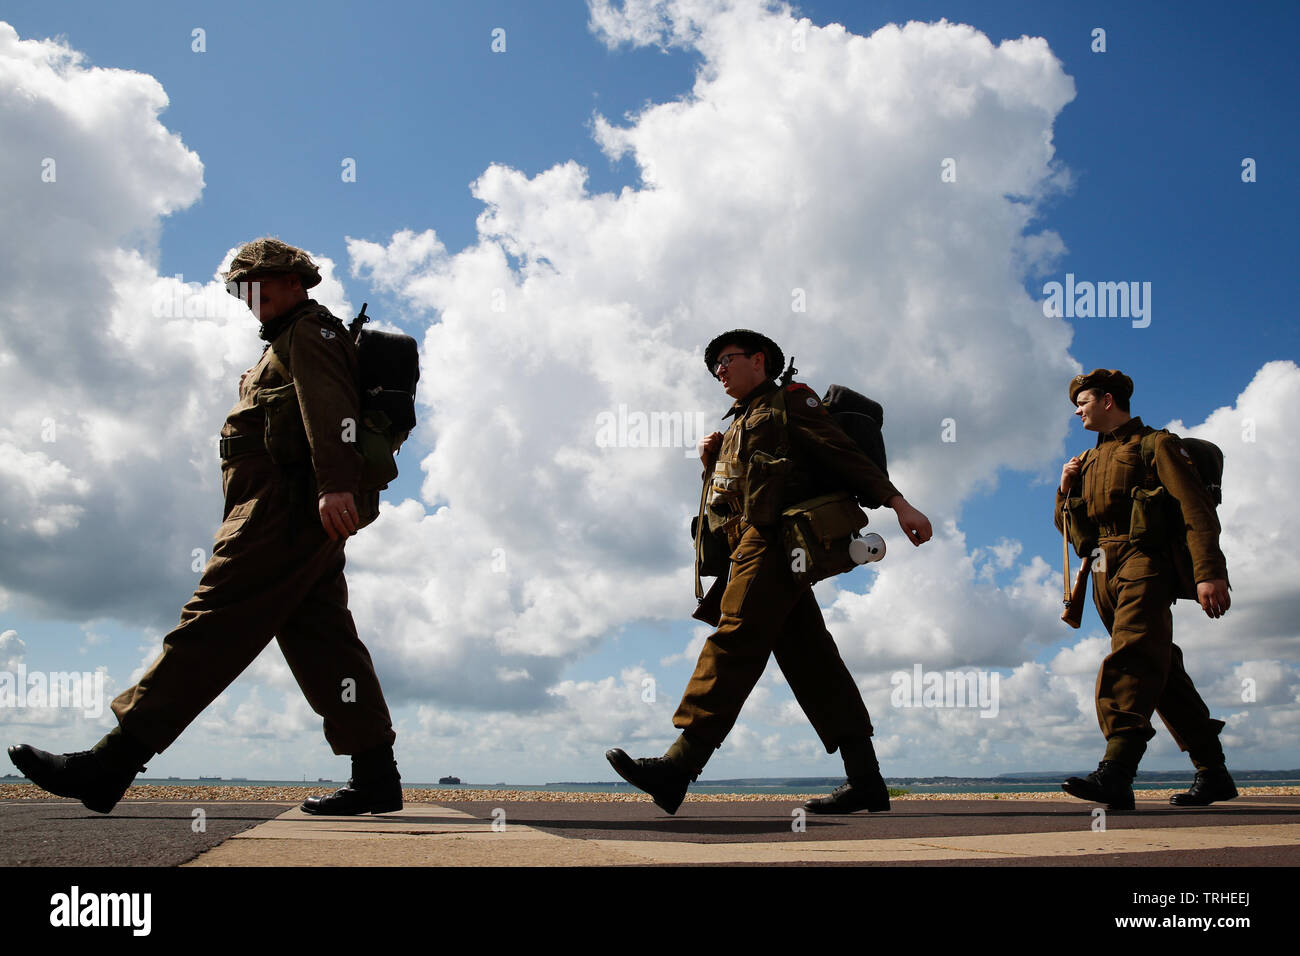 Portsmouth, UK. 6th June, 2019. World War II re-enactors walk the original route of the d-day soldiers took through Portsmouth to the landing craft, in Southsea, Portmsouth Thursday June 6, 2019. D-day commemorations marking the 75th anniversary of the d-day landings Photograph : Credit: Luke MacGregor/Alamy Live News Stock Photo